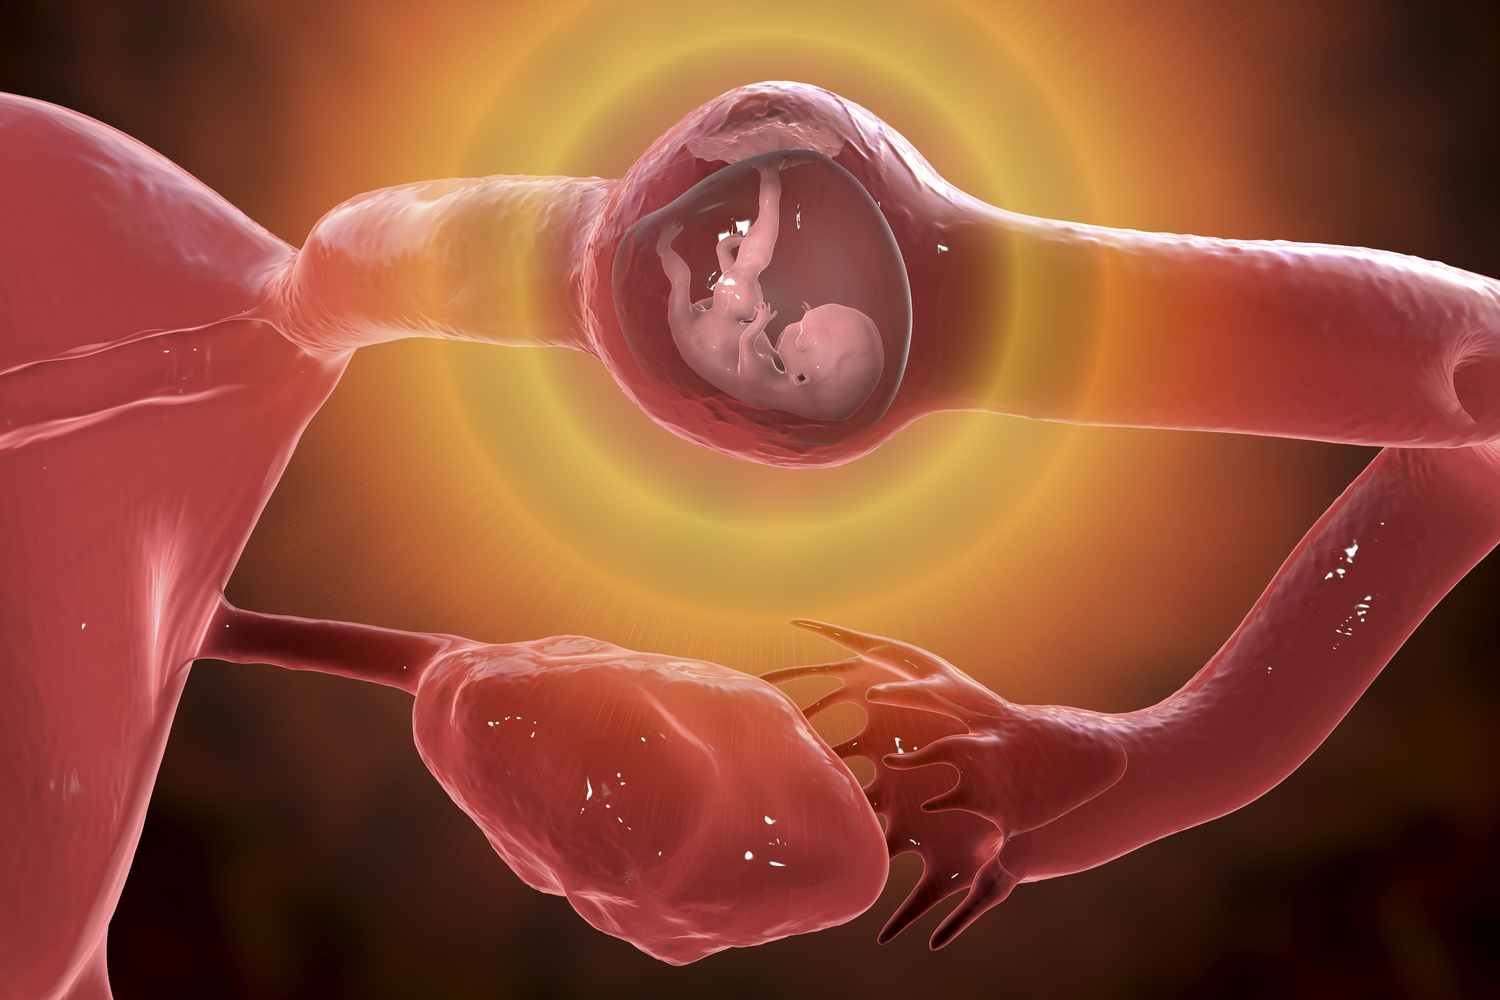 Nanotech delivery boosts efficacy of common ectopic pregnancy drug